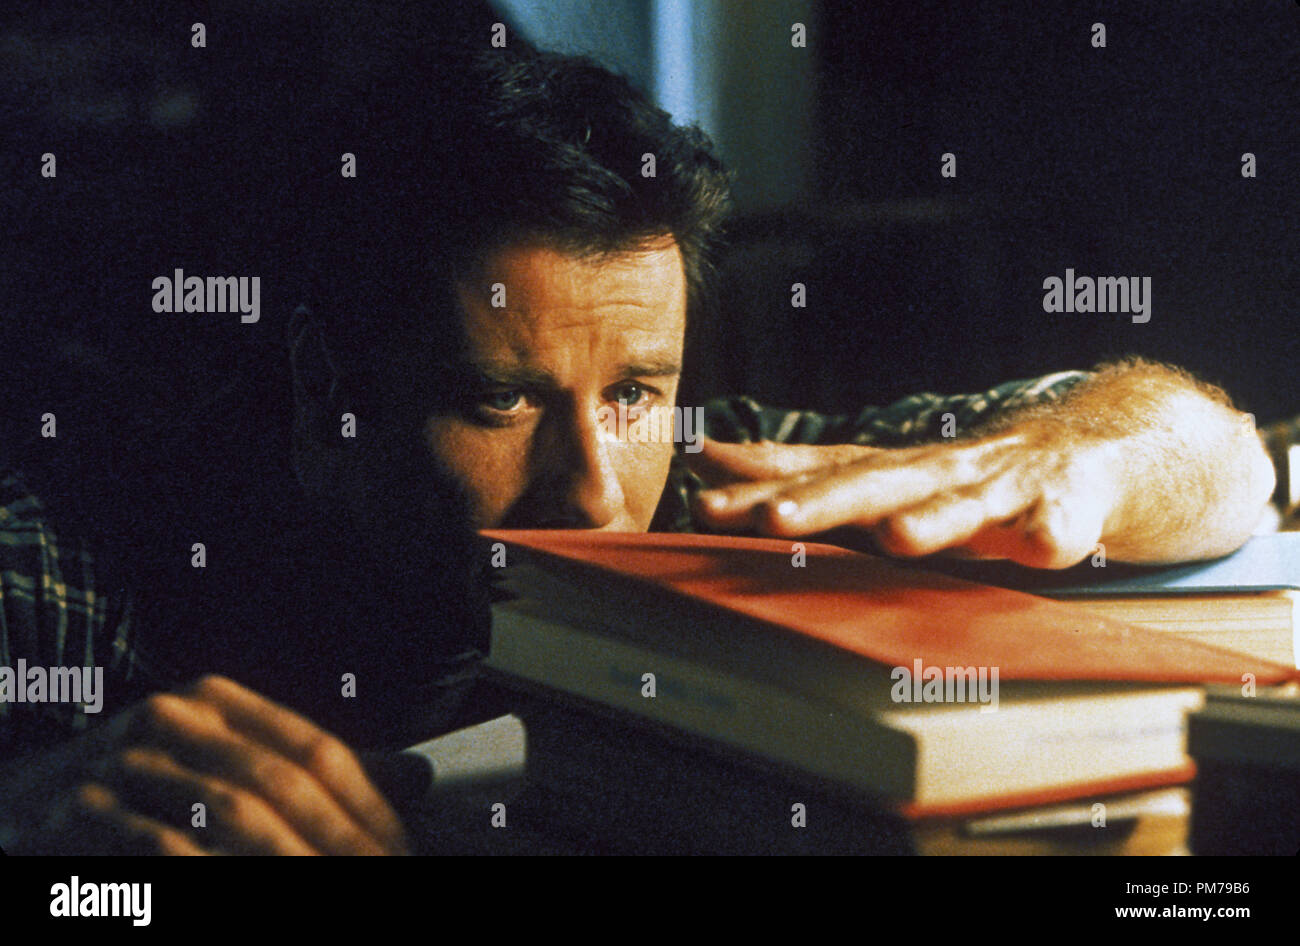 Film Still from 'Phenomenon' John Travolta © 1996 Touchstone Pictures Photo Credit: Zade Rosenthal  File Reference # 31042303THA  For Editorial Use Only - All Rights Reserved Stock Photo